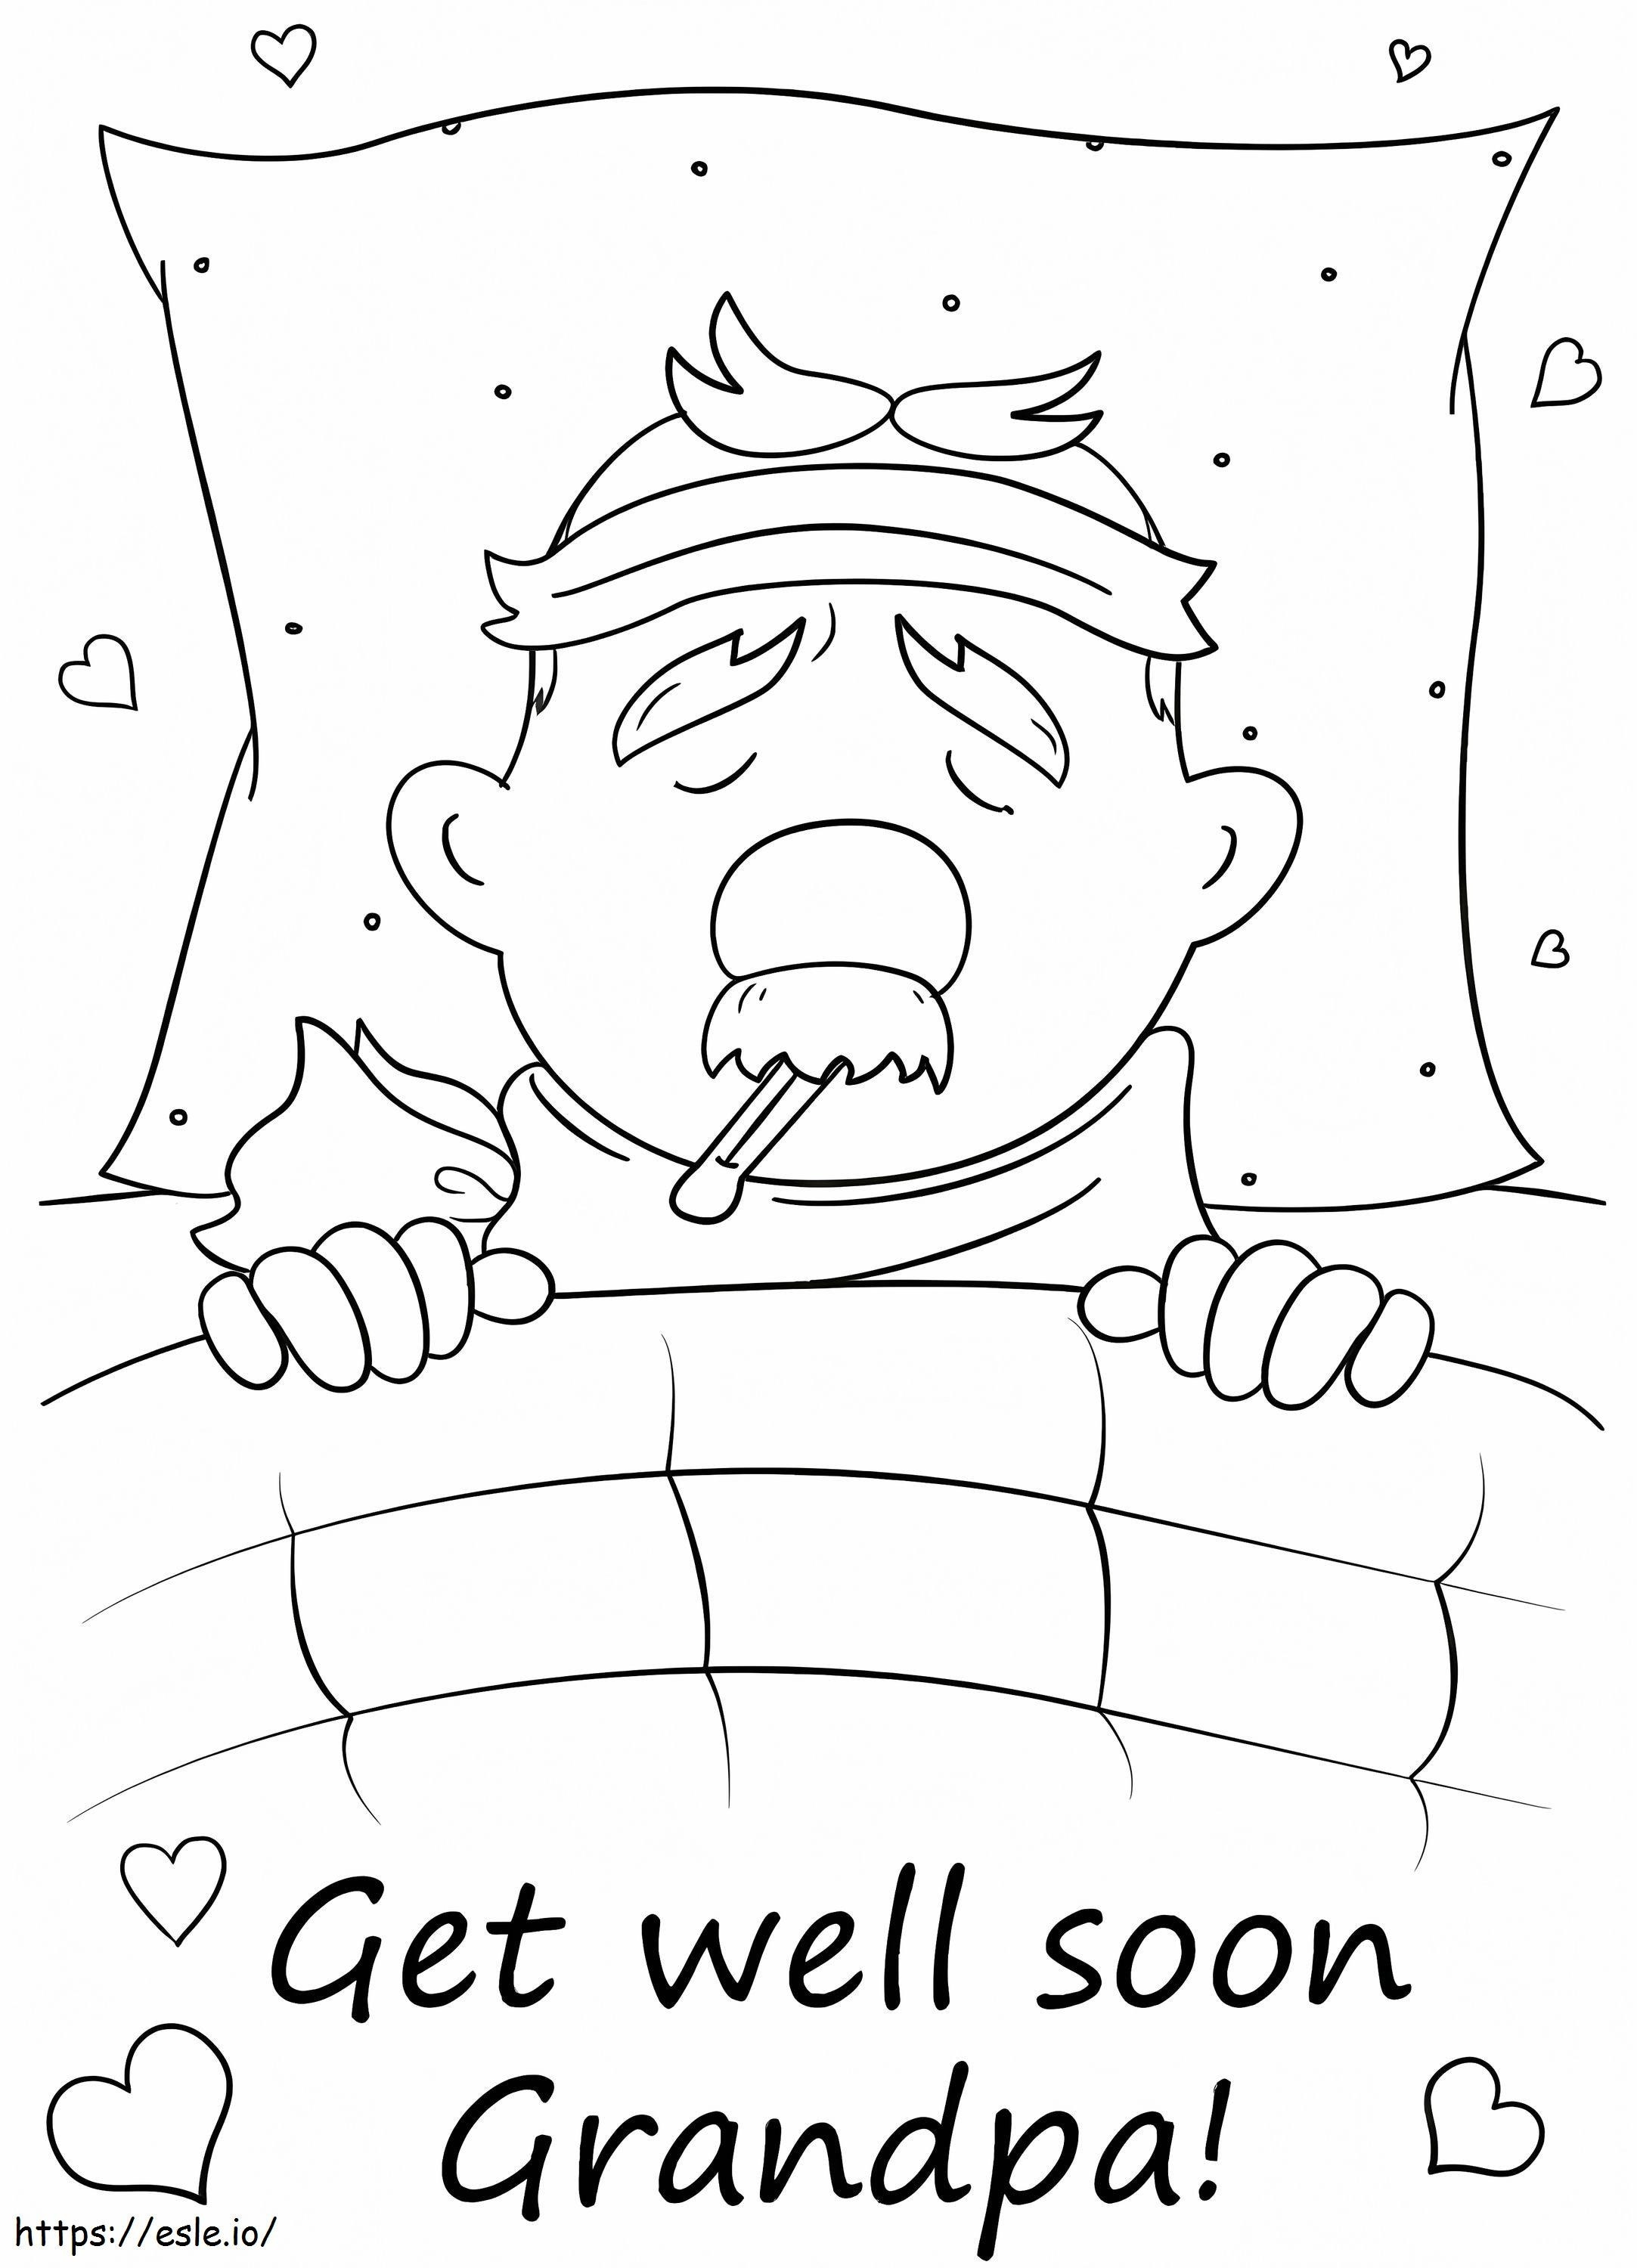 Get Well Soon Grandpa coloring page